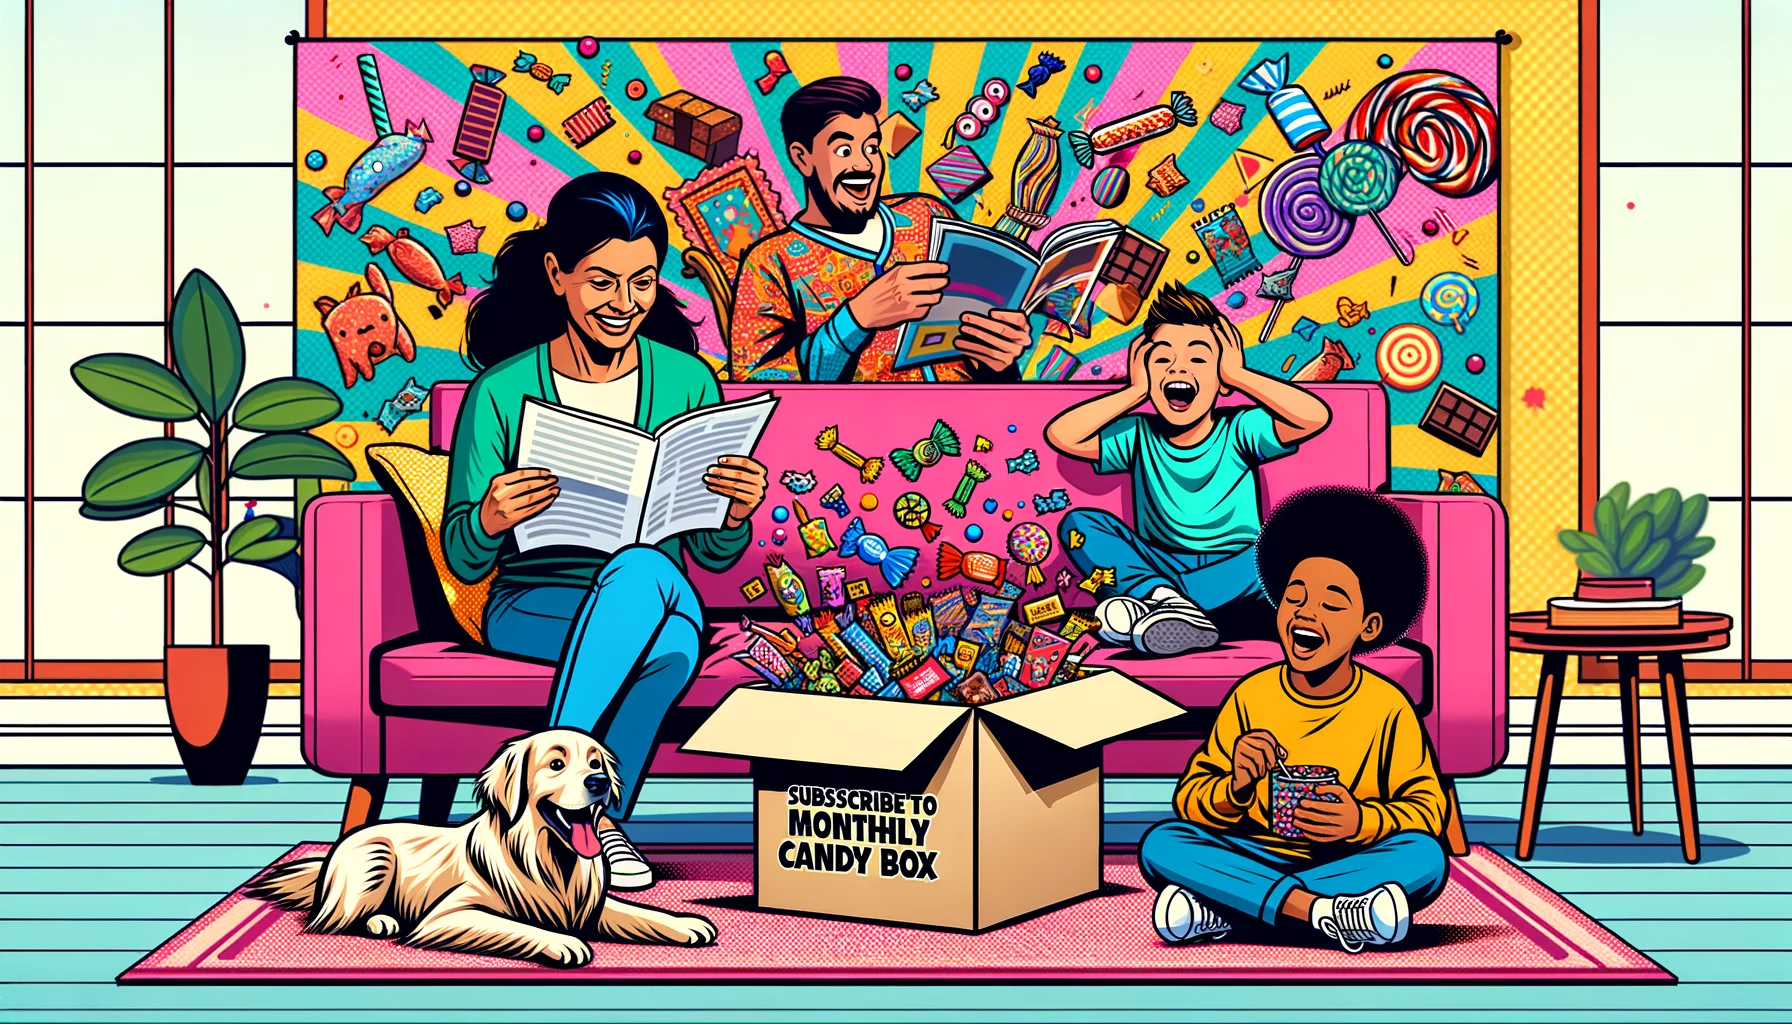 Picture a bright, lively scene in a cozy family room. A Hispanic woman sitting on a plush pink sofa engrossed in her favorite magazine. A Caucasian teenager, her son, across the room unwrapping a Monthly Candy Box with an expression of sheer delight mirrored on a Black toddler sitting on the floor nearby. The box is spilling over with colorful wrapped candies, chocolates, and lollipops. A Golden Retriever, mouth watering, sitting patiently beside the teenager with hopeful eyes towards the candy box. In the background, a bold vibrant banner reads 'Subscribe to Monthly Candy Box' with comical illustrations of joyous people and playful candies.